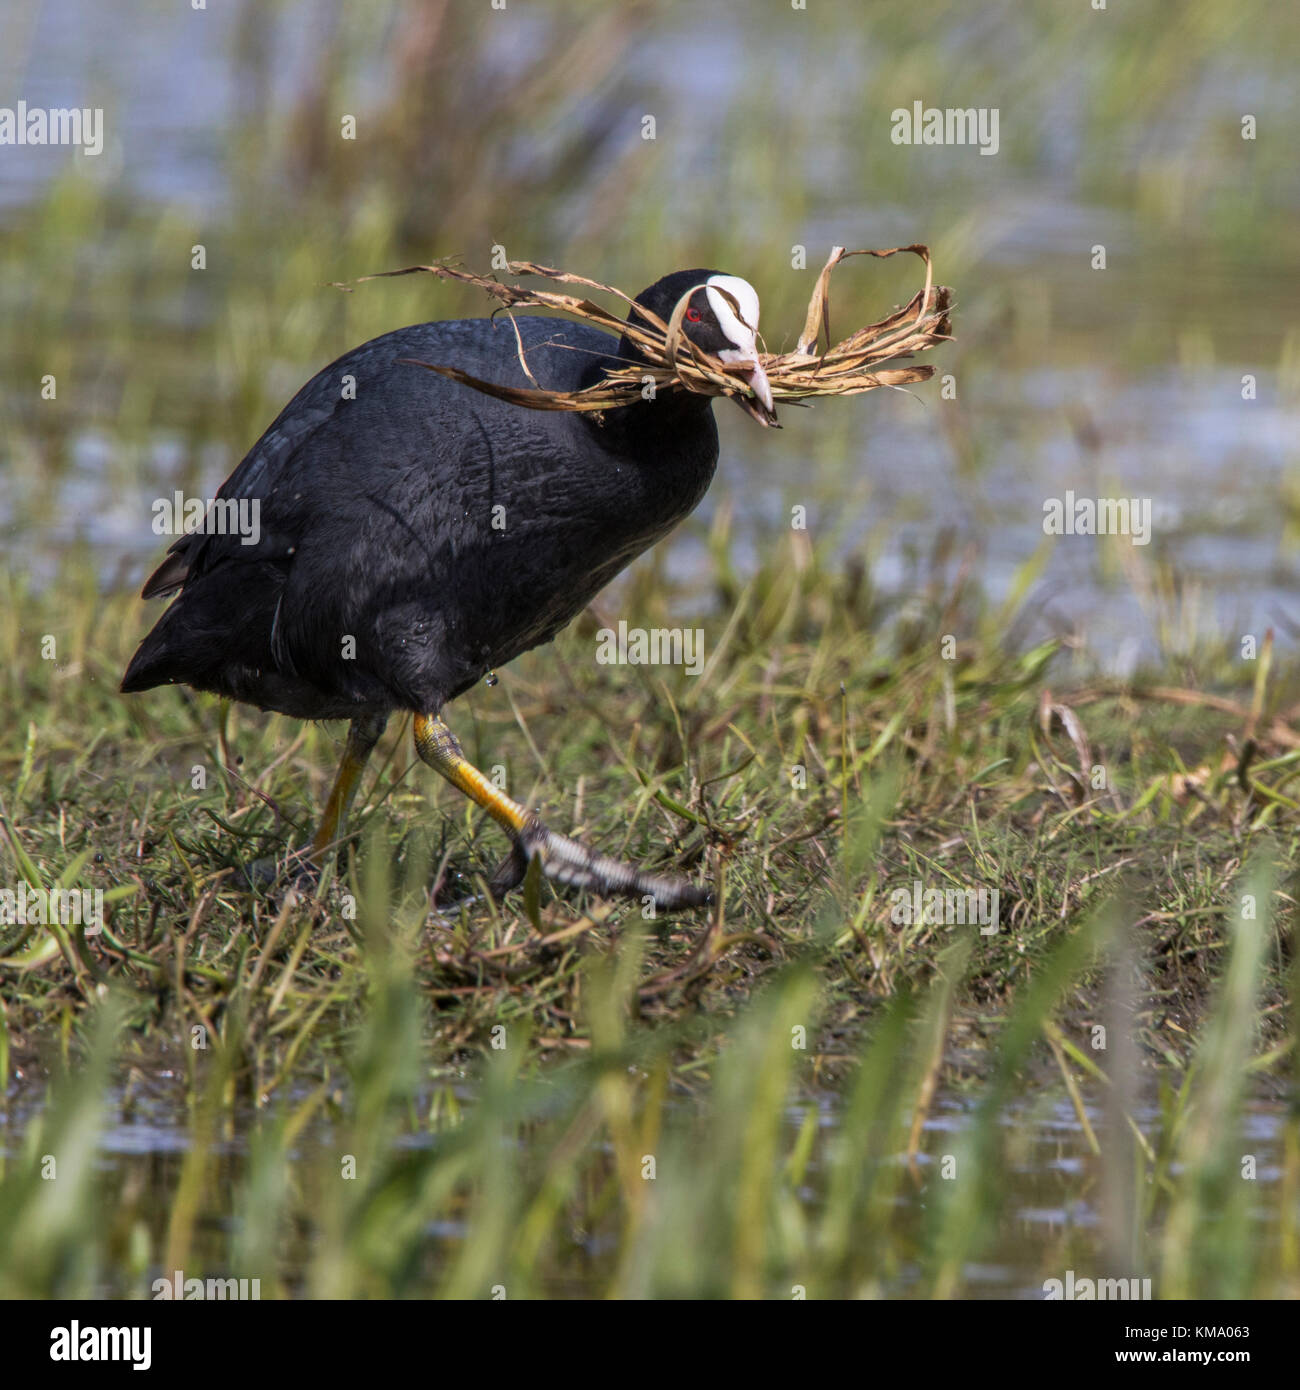 Eurasian coot (Fulica atra) in wetland collecting nesting material like grass blades for nest building in the breeding season Stock Photo